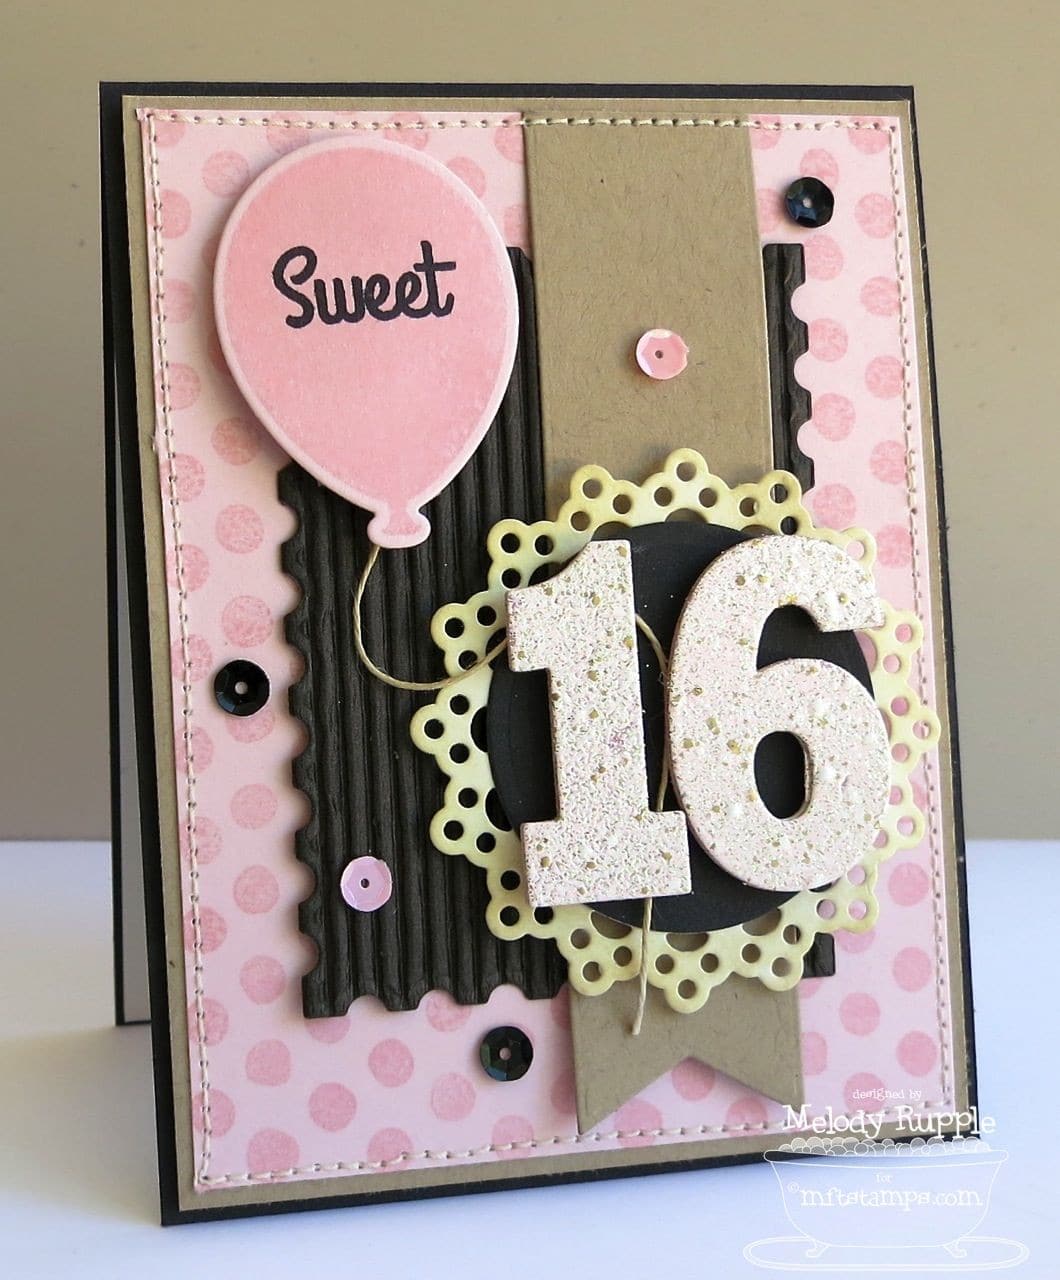 The top 22 Ideas About 16th Birthday Card Ideas